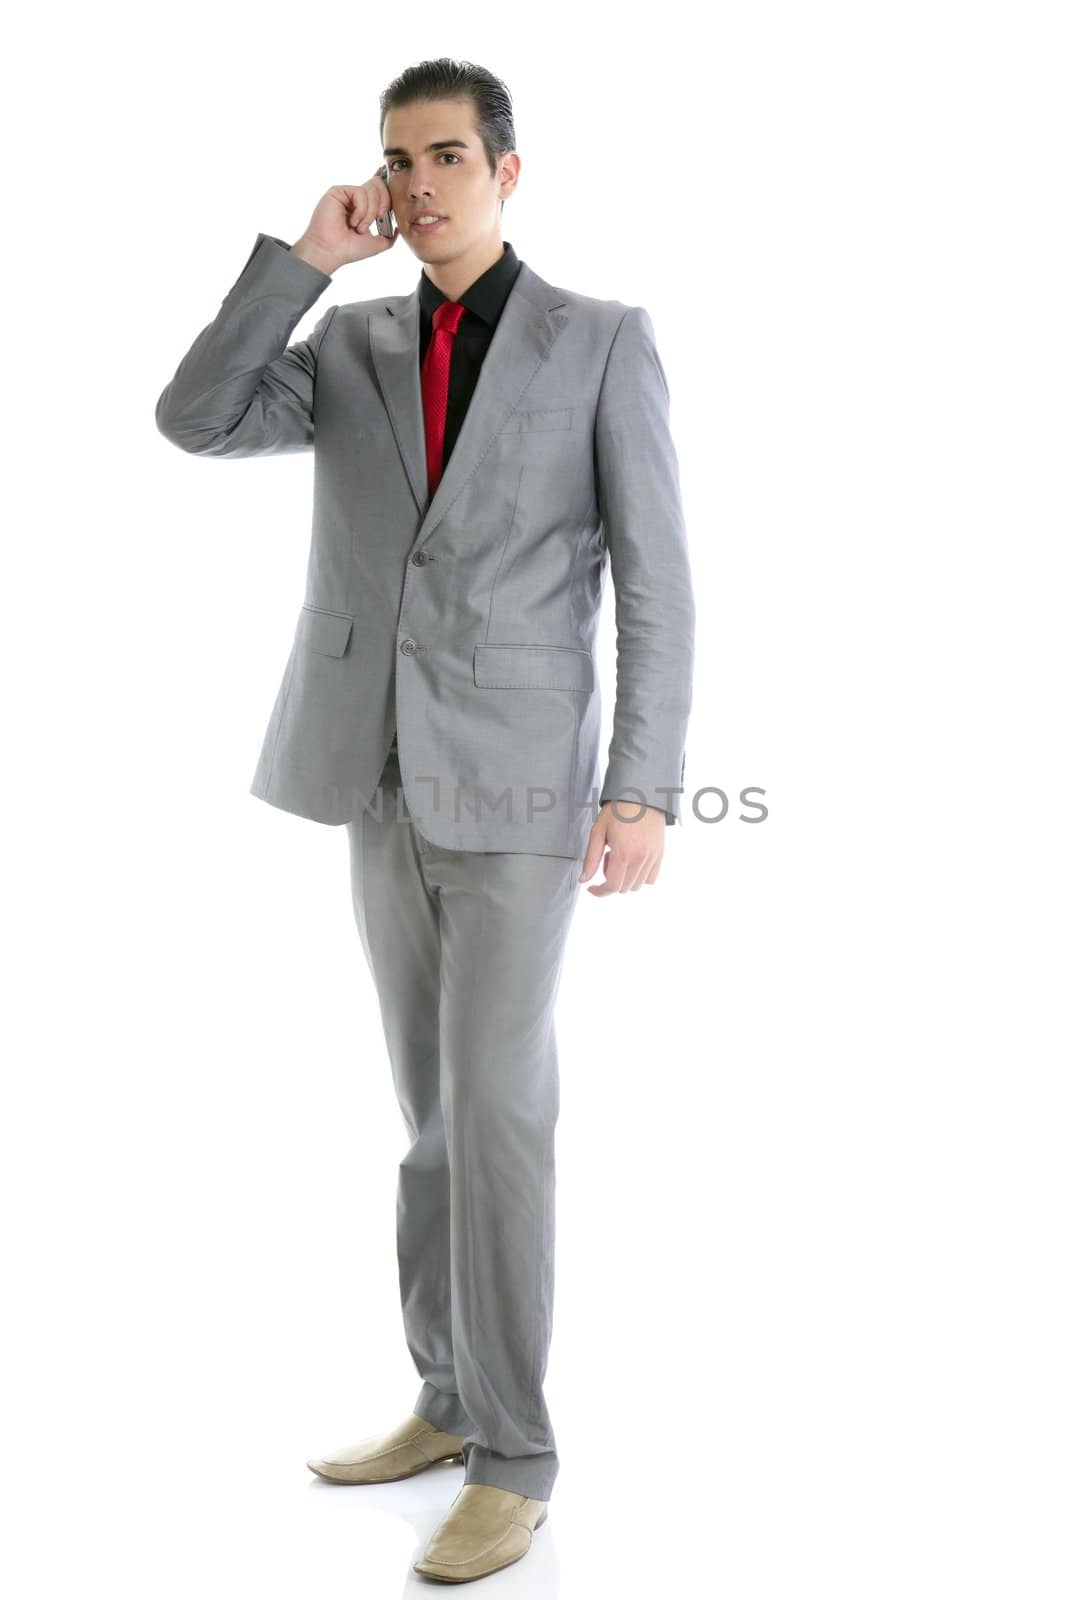 Businessman young full body talking phone isolated on white